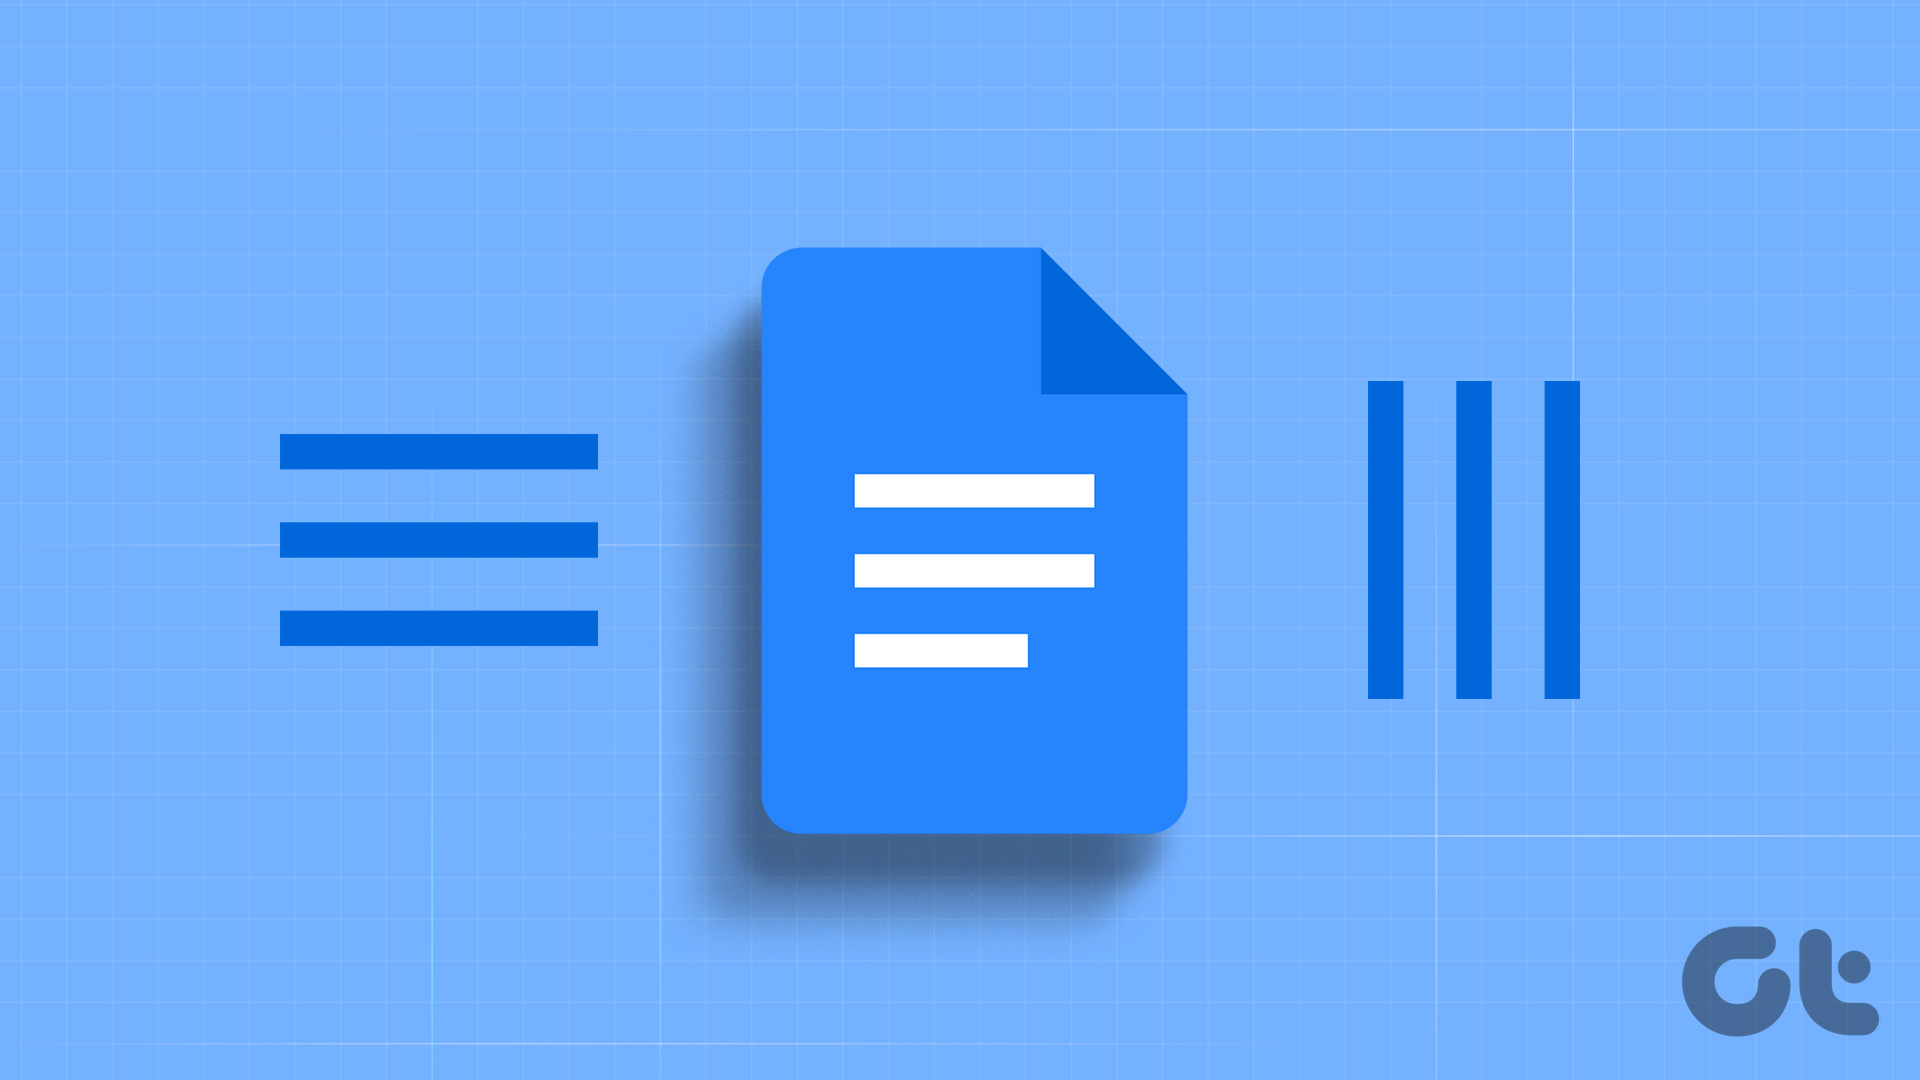 How to Add Horizontal and Vertical Lines in Google Docs